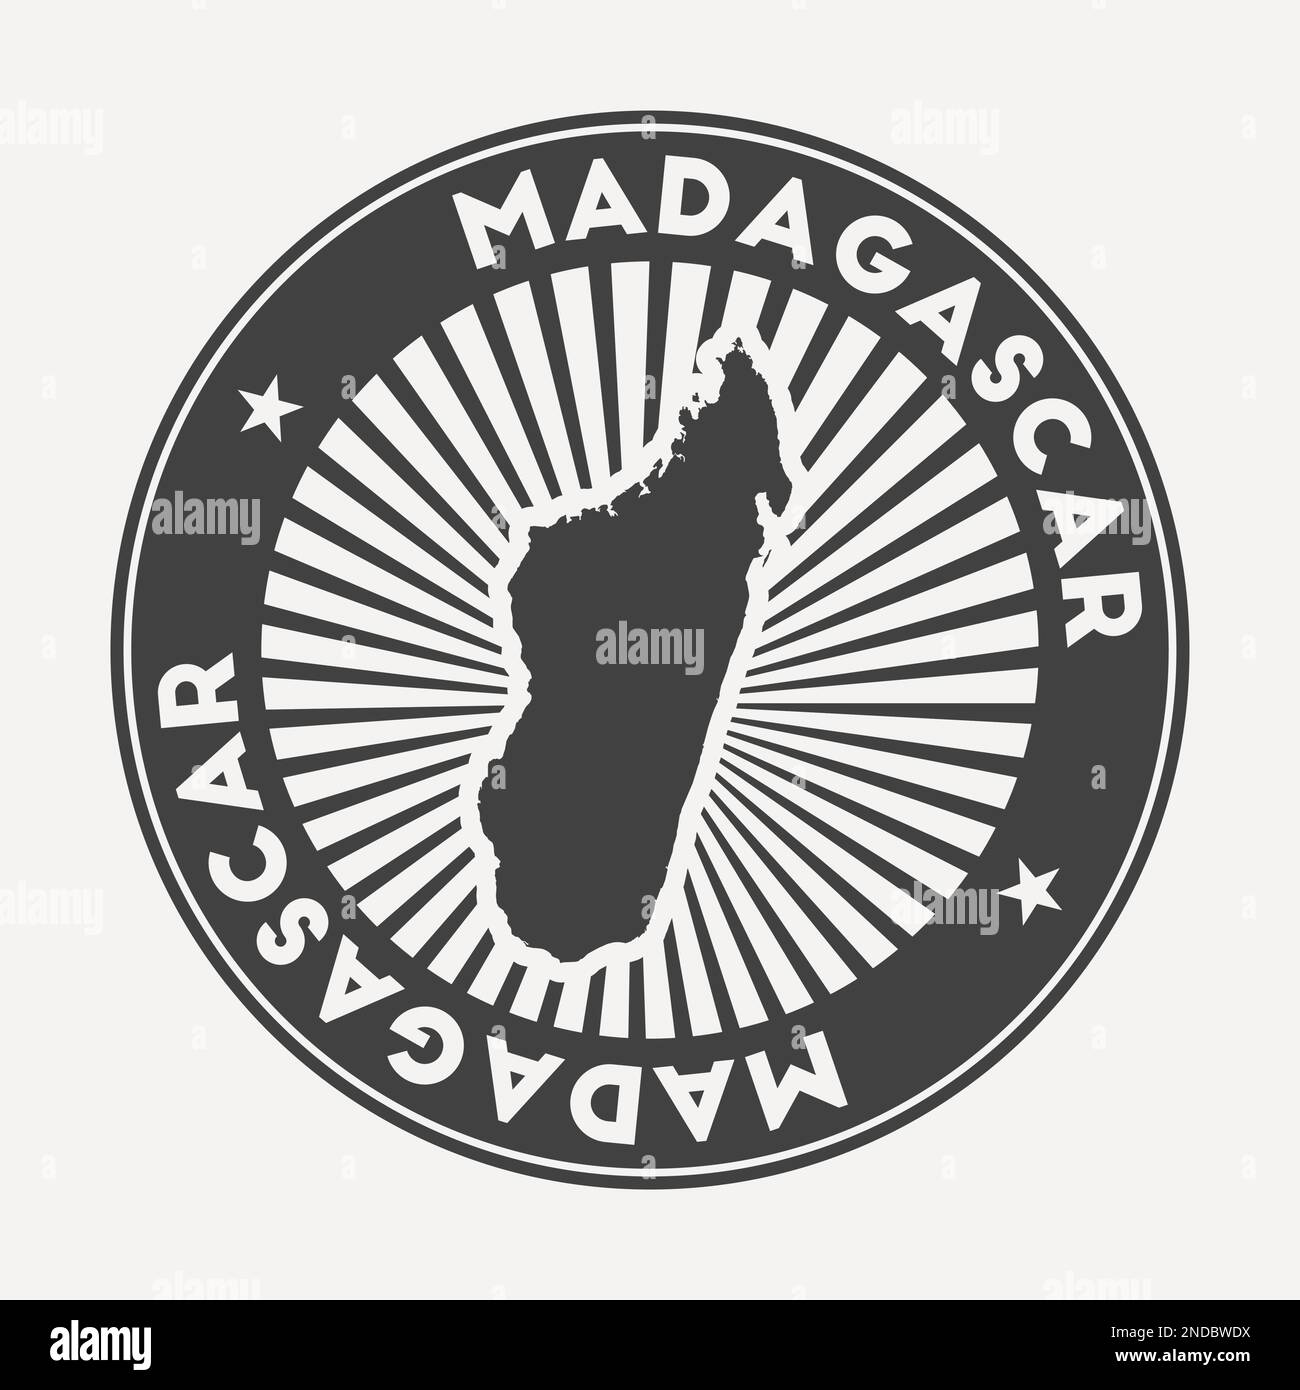 Madagascar round logo. Vintage travel badge with the circular name and map of country, vector illustration. Can be used as insignia, logotype, label, Stock Vector